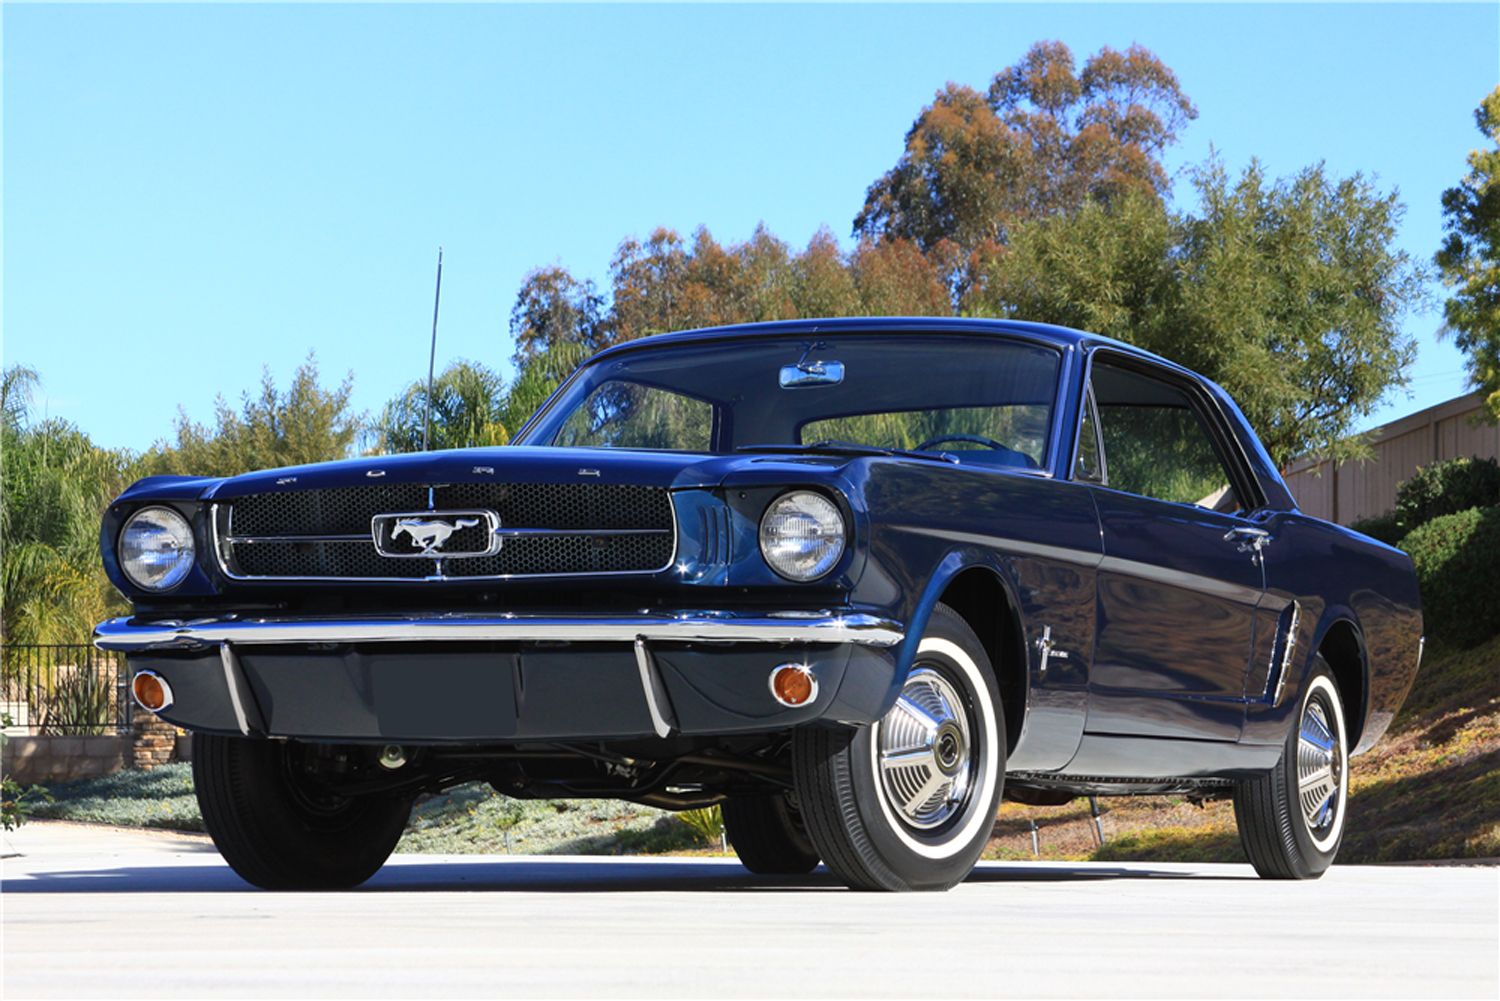 Navy Blue 1964 Ford Mustang Parked Outside